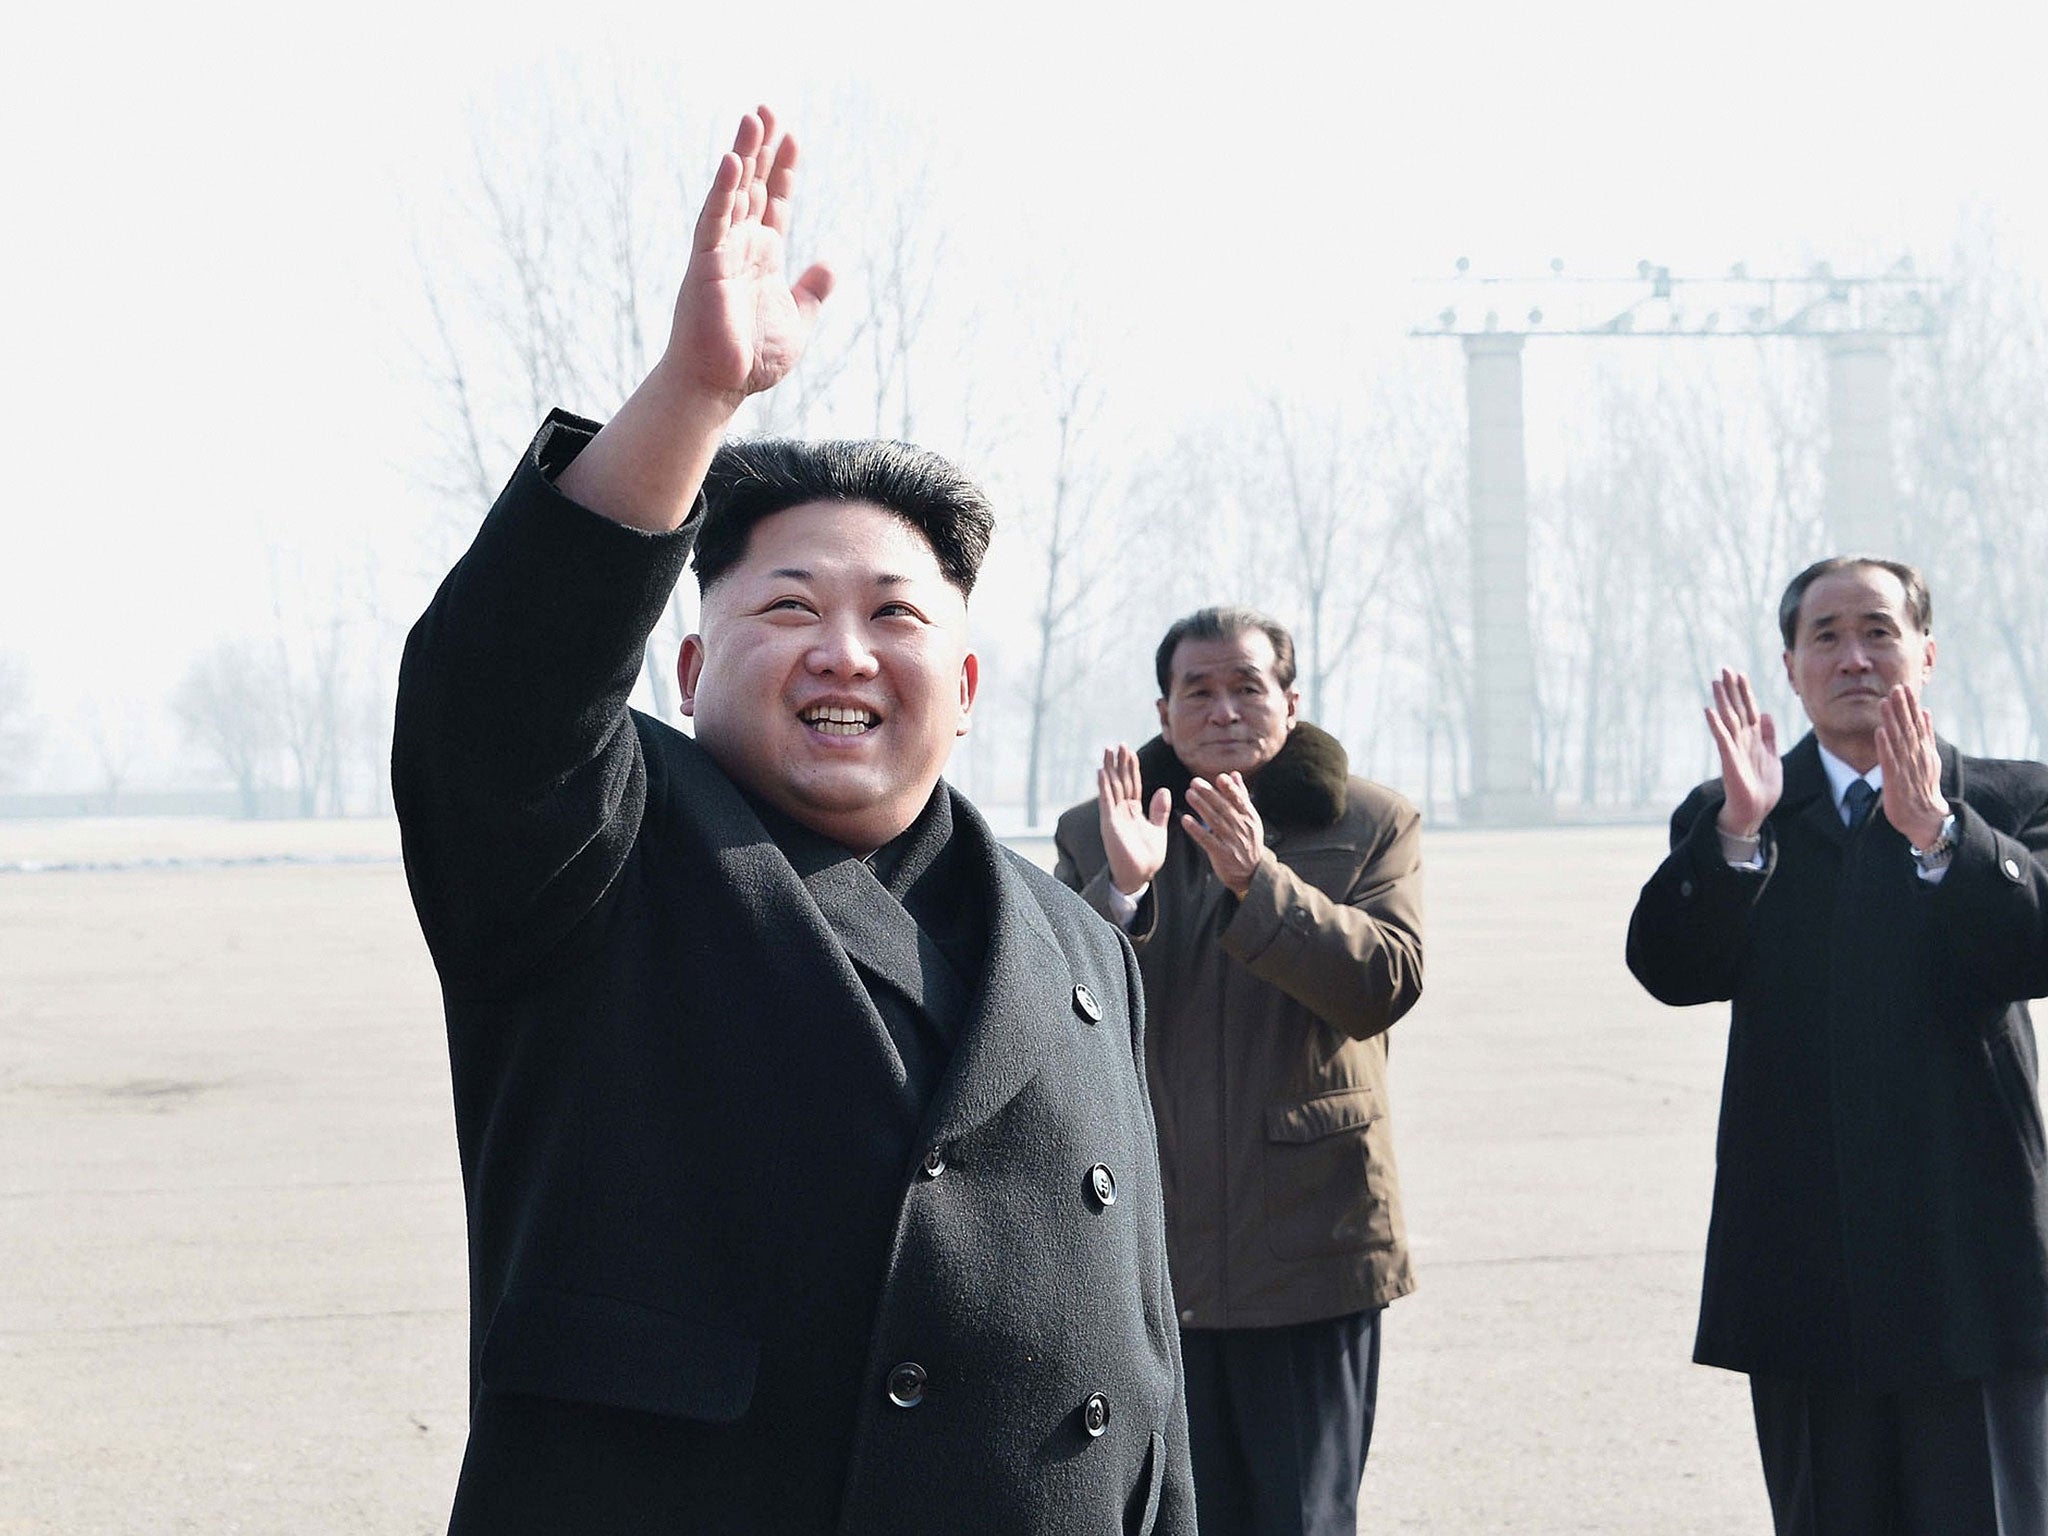 Kim Jong-un has ordered the latest execution in a series of purges